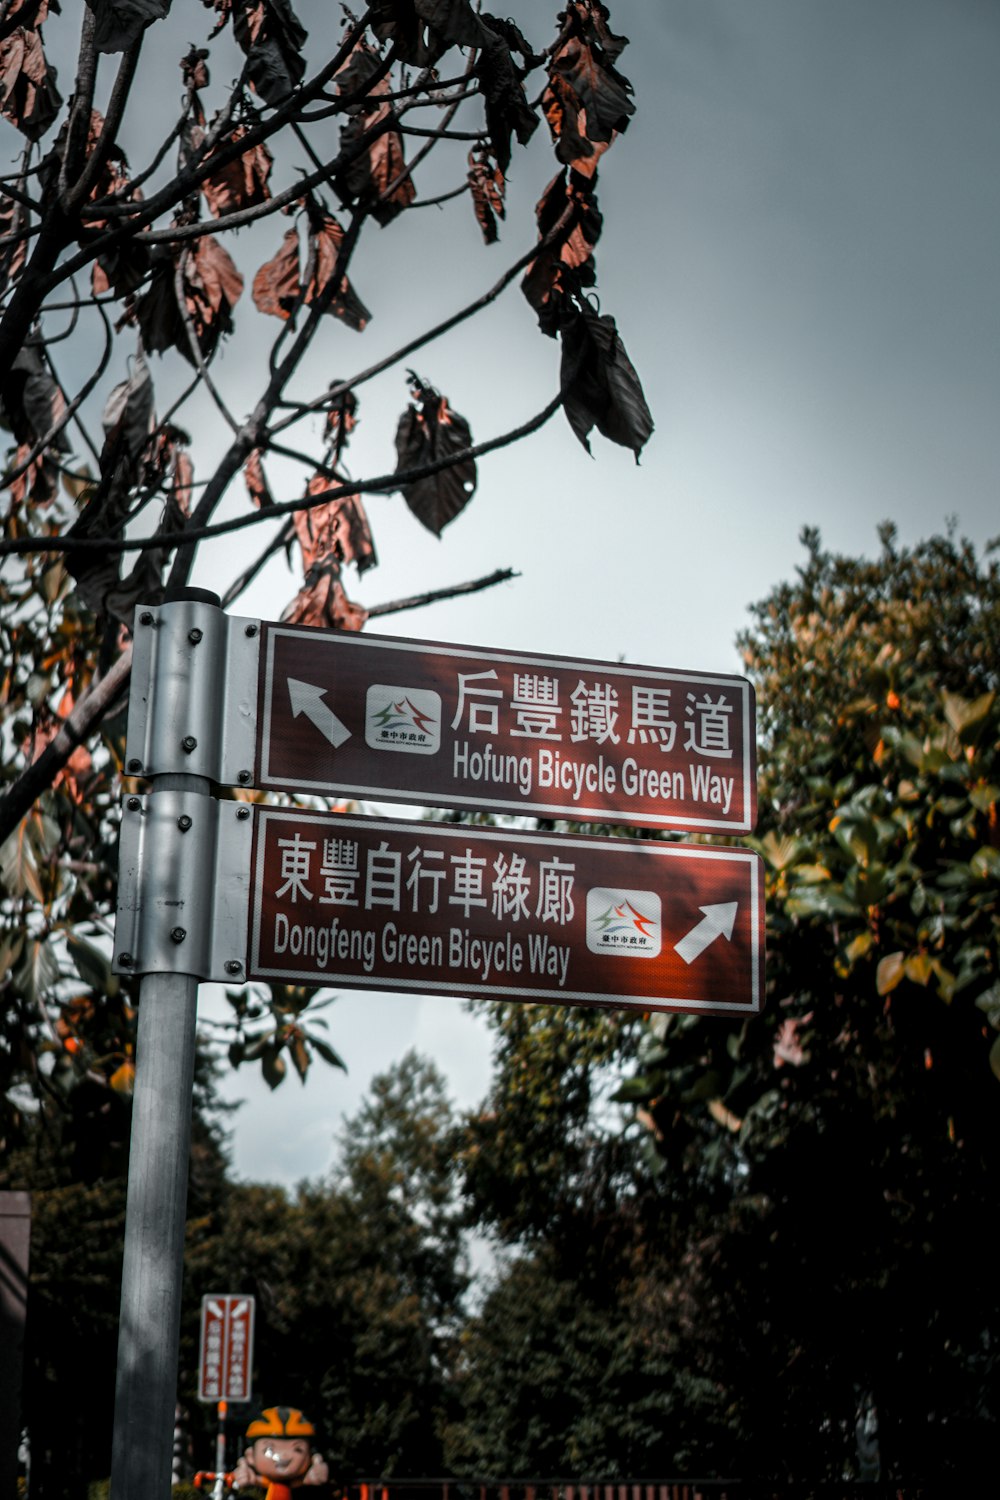 red and white street sign